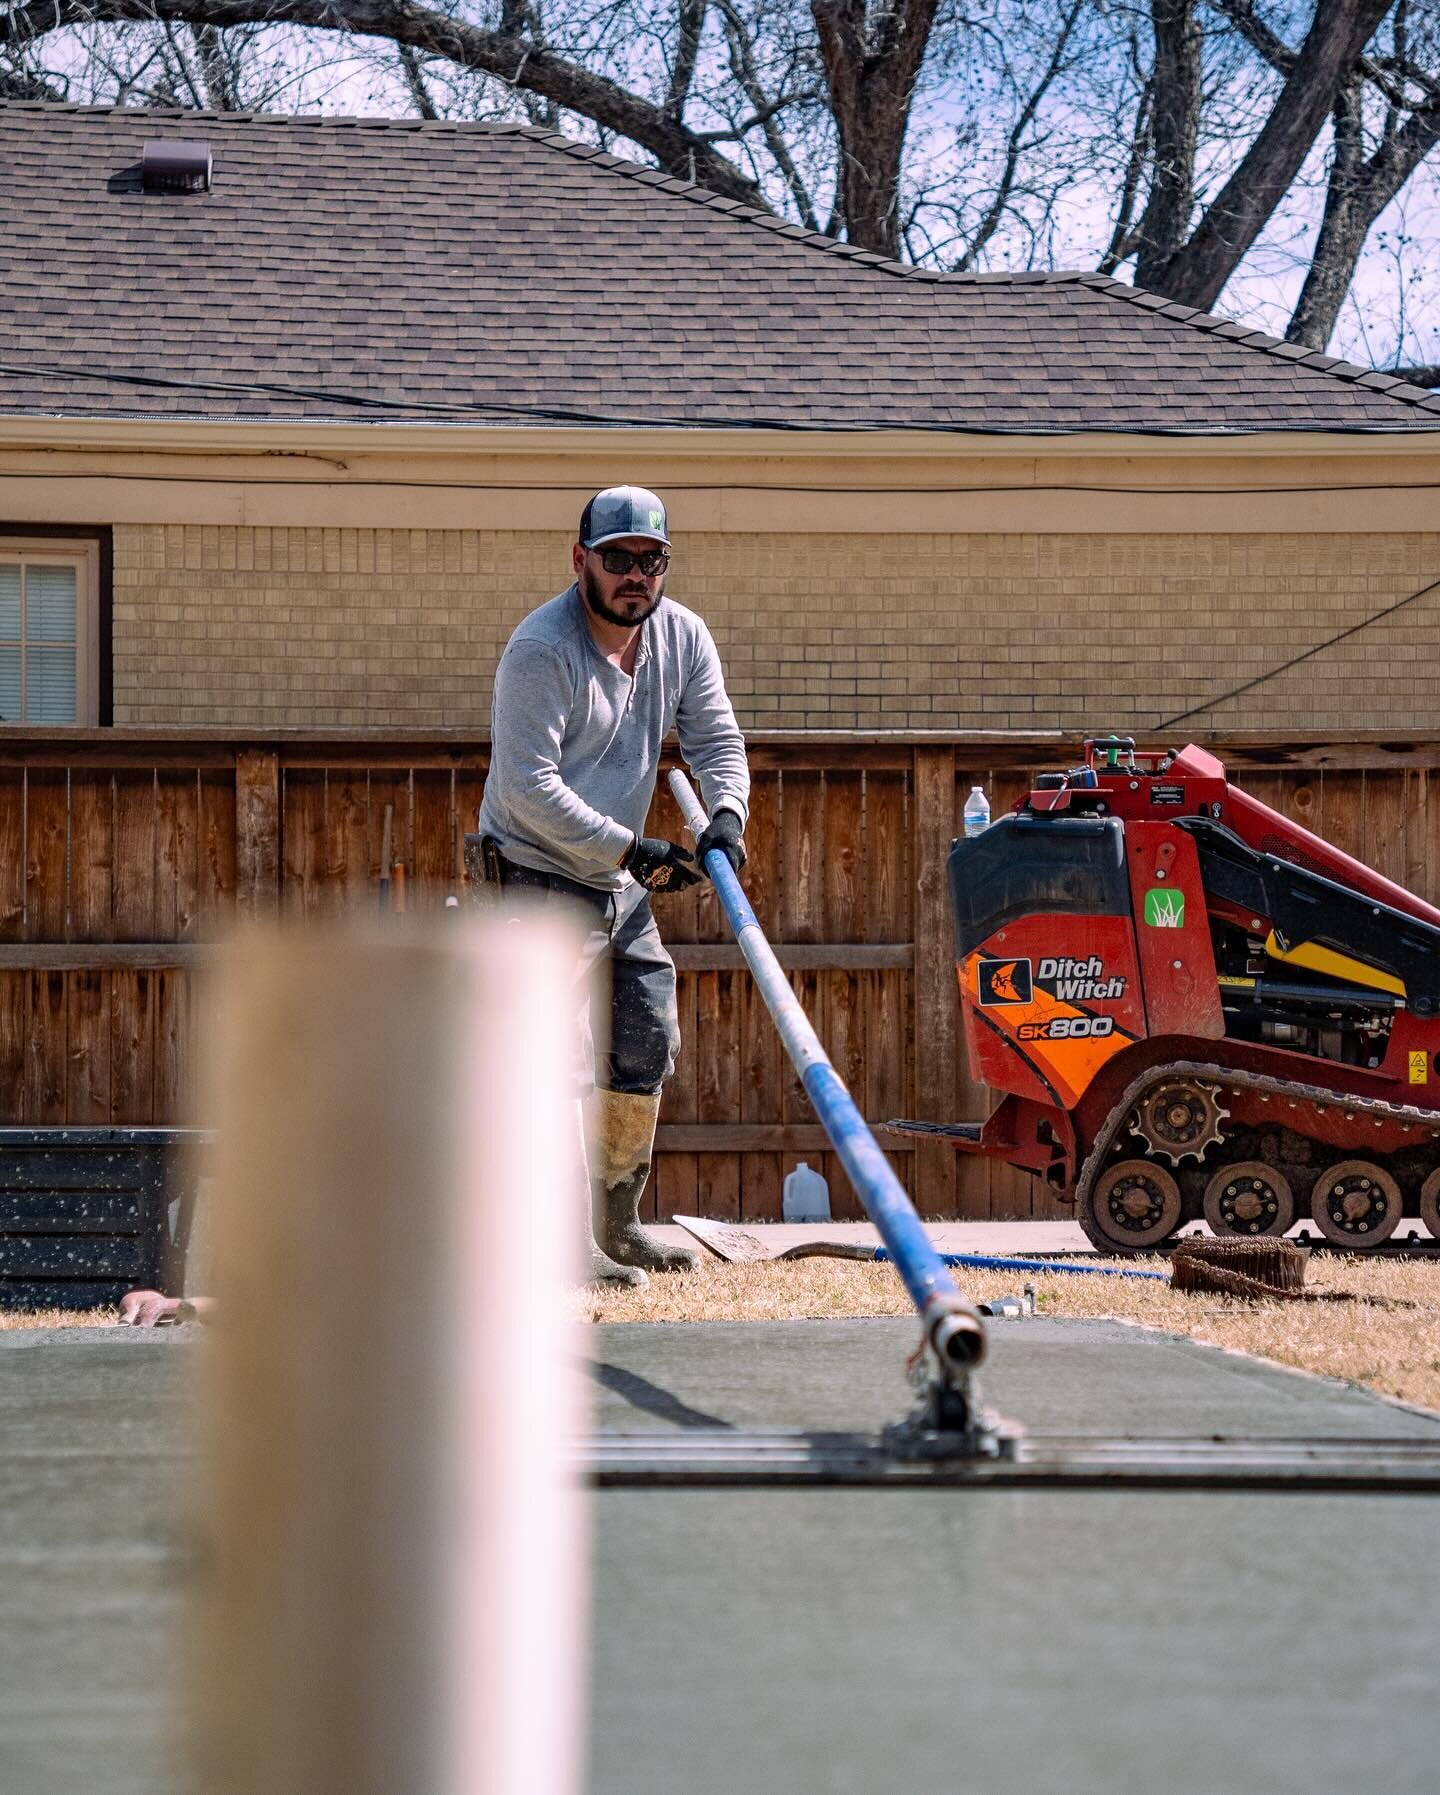 We&rsquo;re diving into an epic backyard makeover, and guess what? We&rsquo;re starting with the basics - pouring that concrete! 

But that&rsquo;s just the beginning! We&rsquo;ve got some amazing plans in the works to transform your outdoor space in